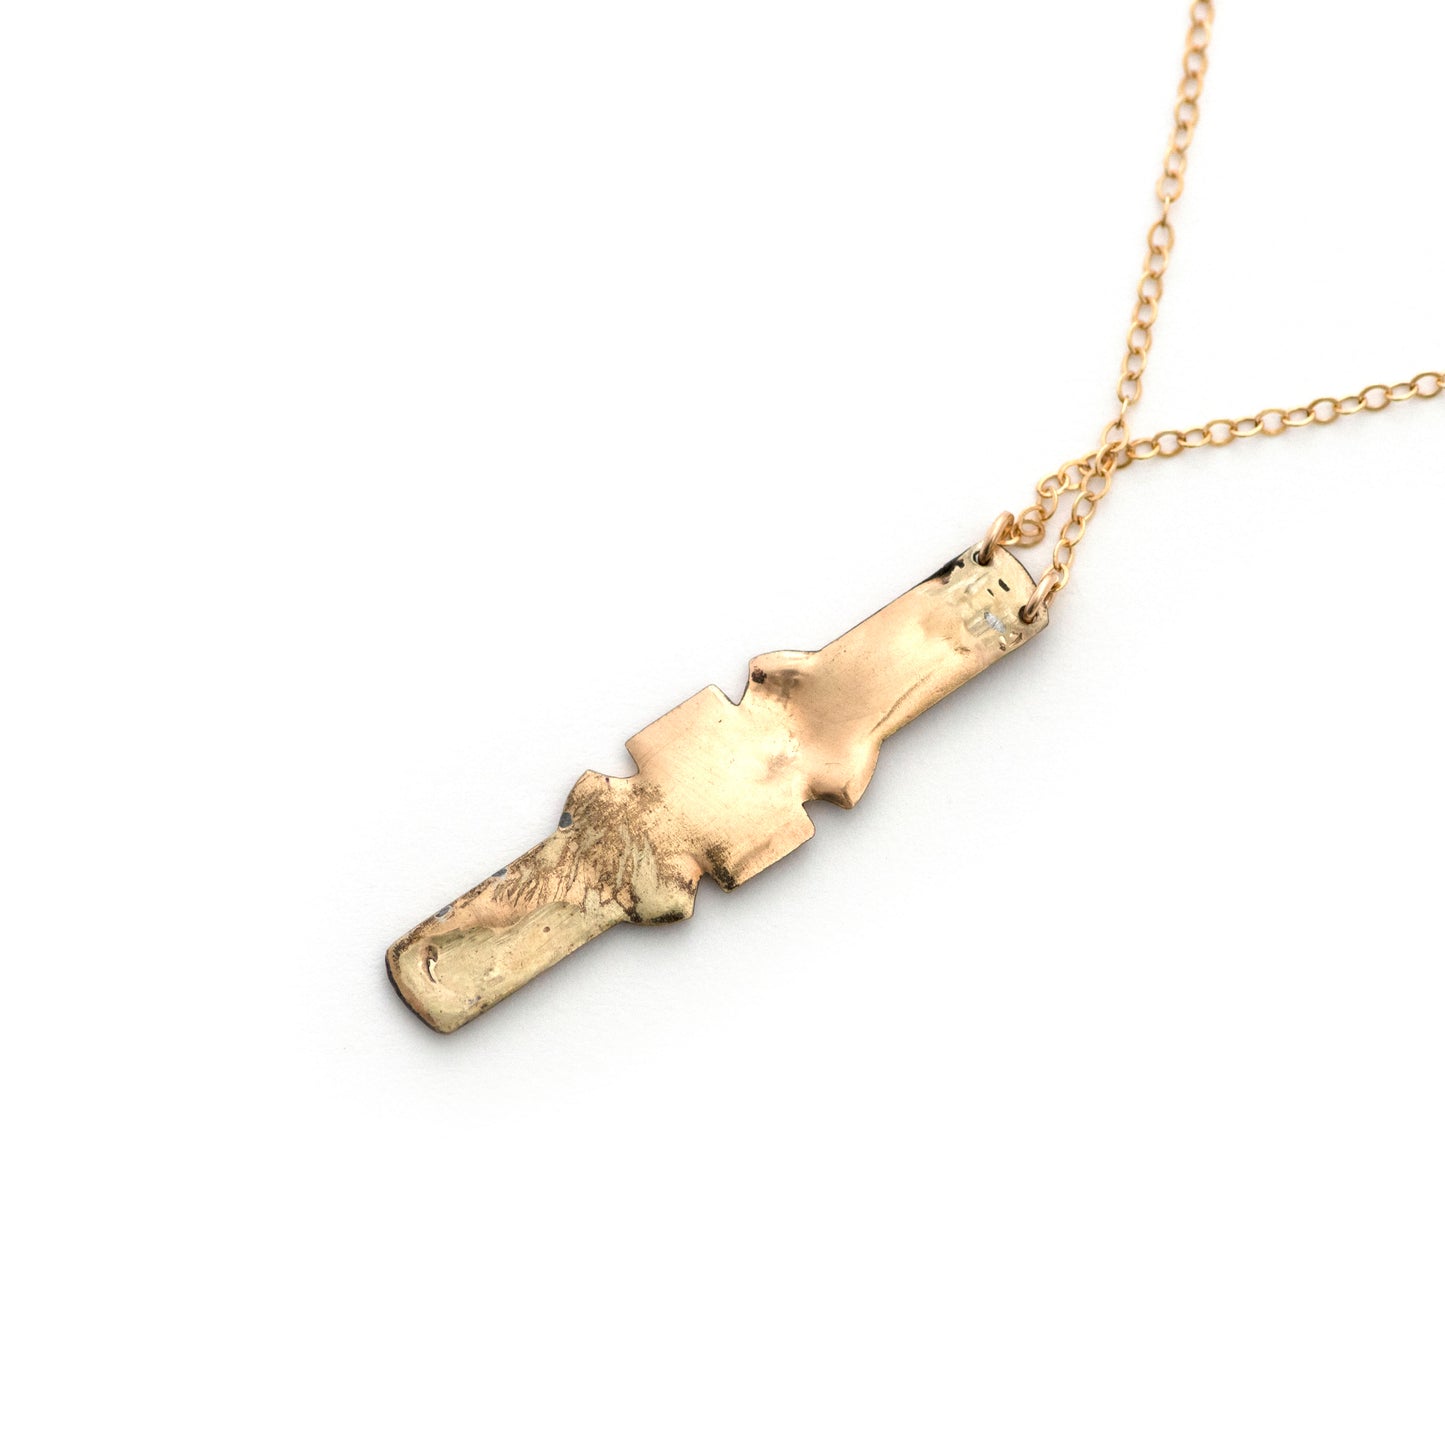 The back of an antique vertical bar pin conversion pendant necklace on an all white background.